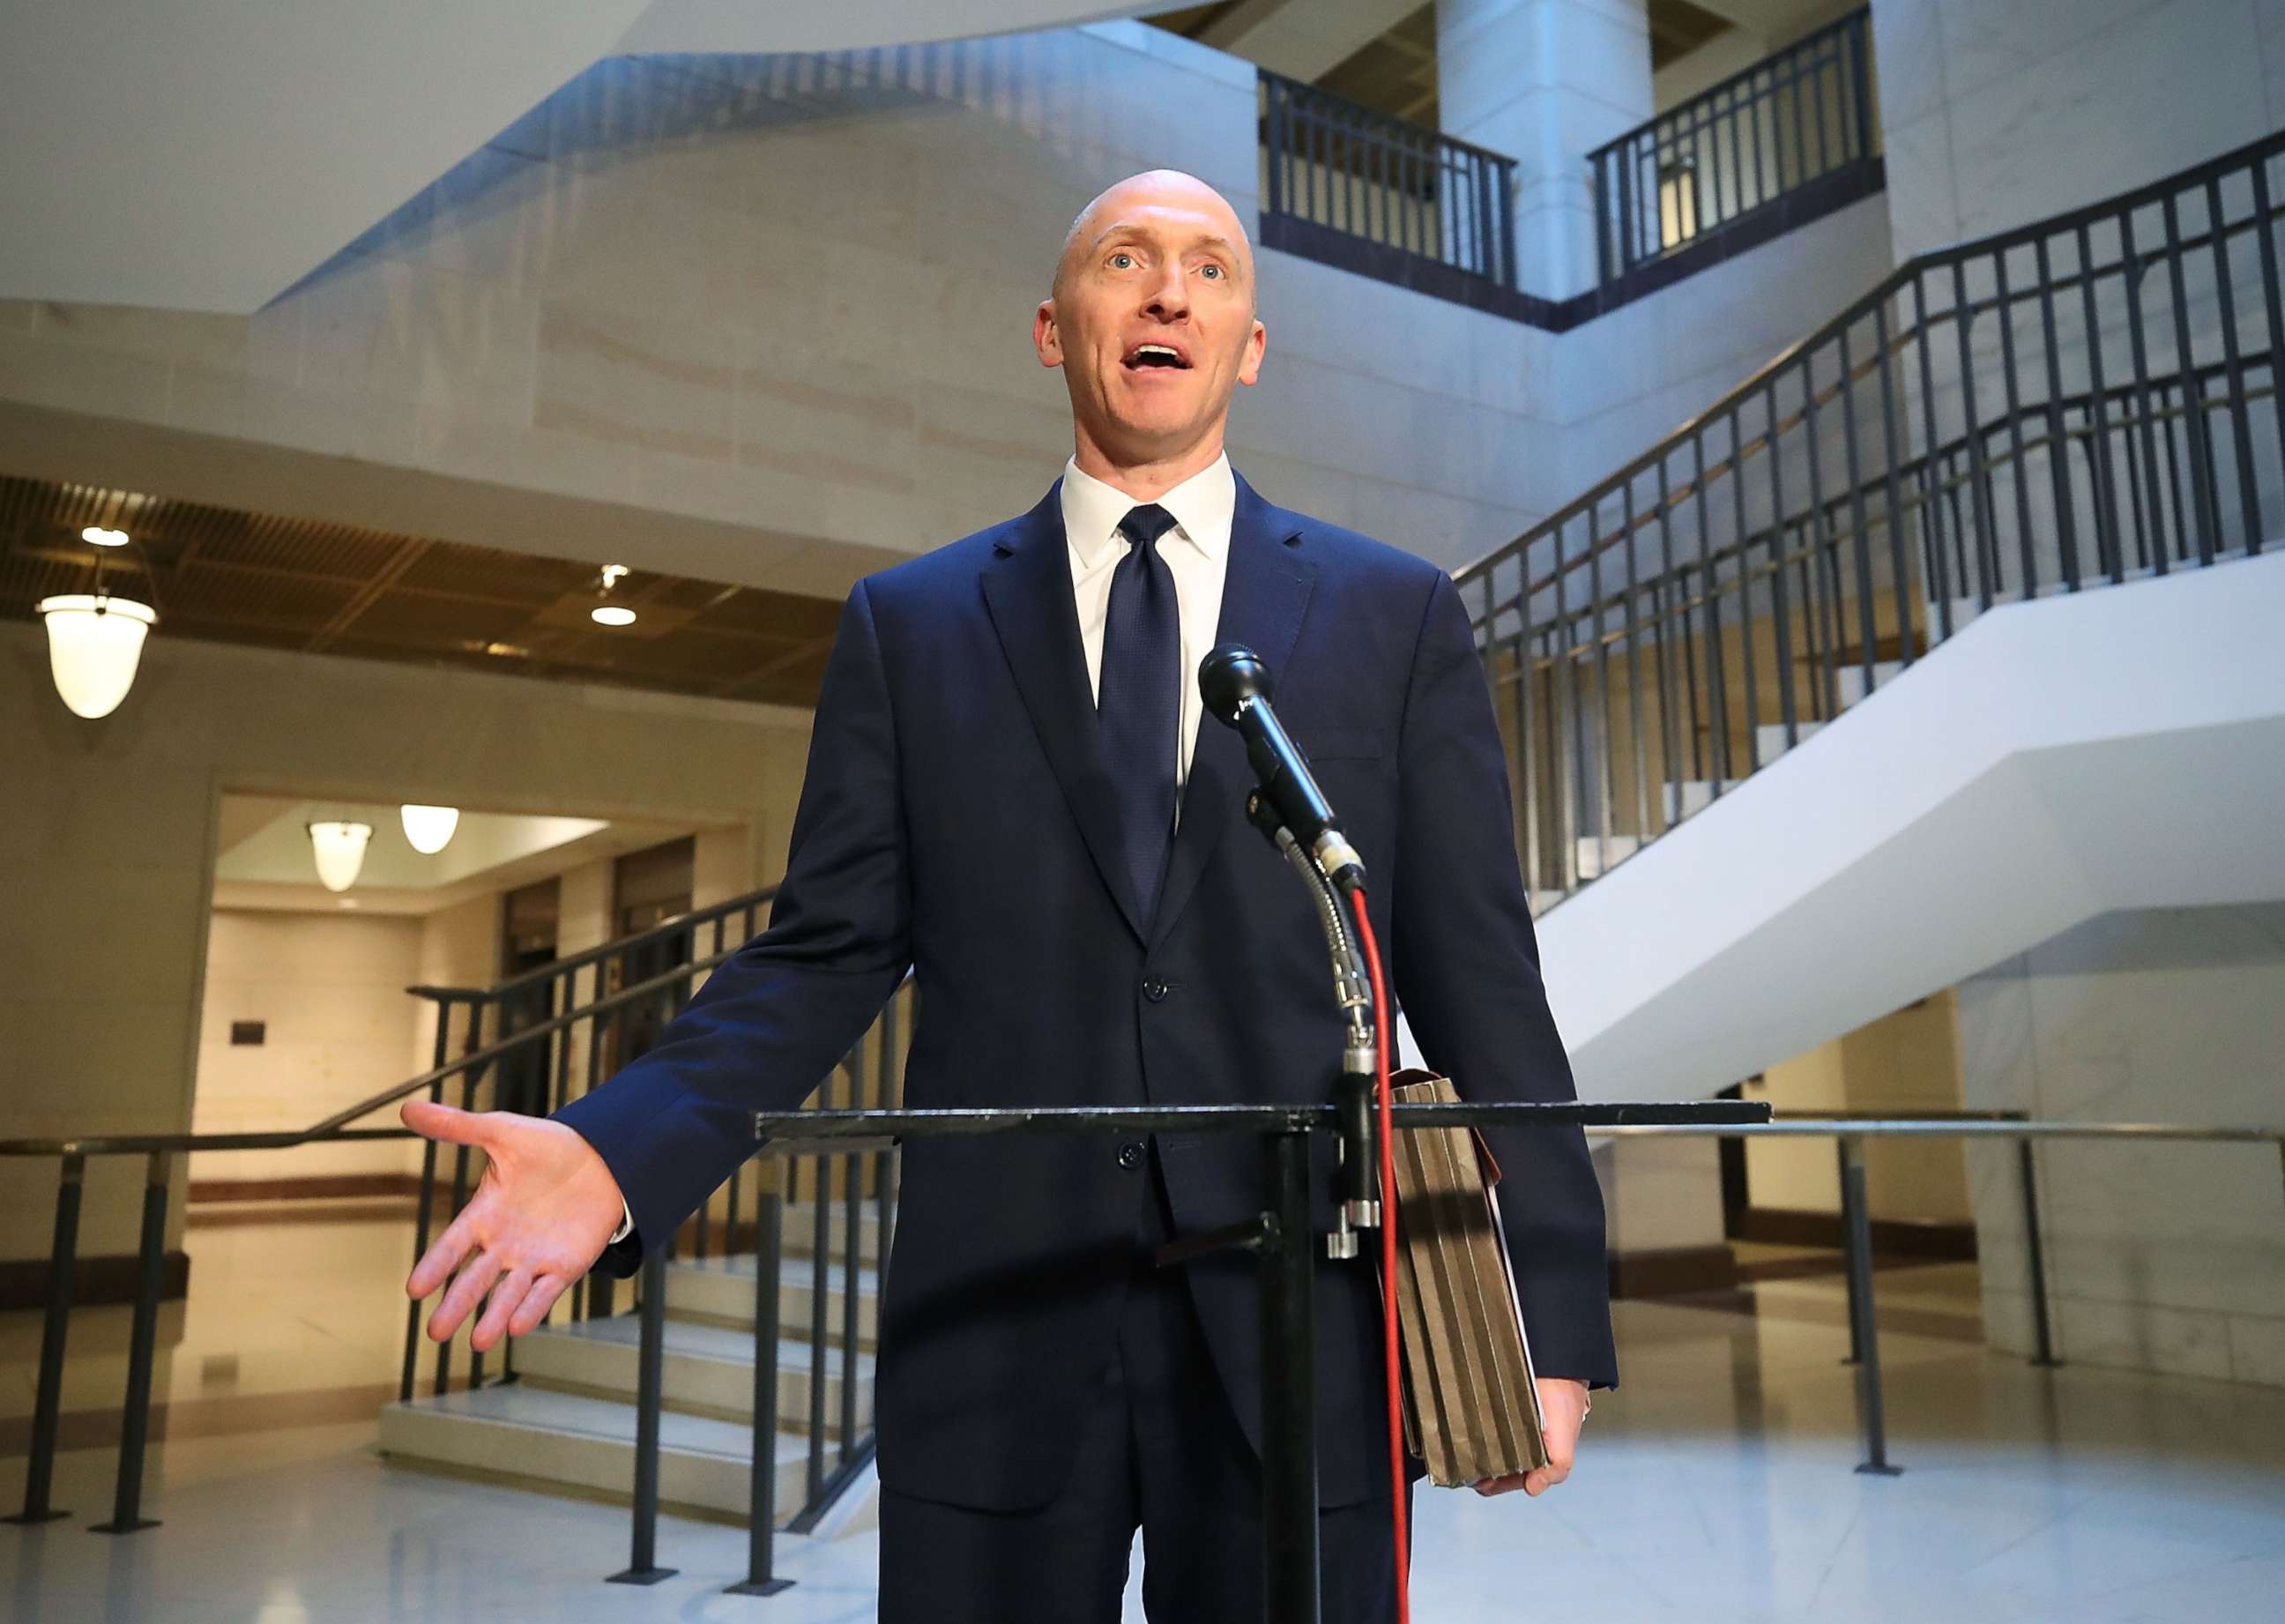 PHOTO: Carter Page, a former foreign policy adviser for the Trump campaign, speaks to the media after testifying before the House Intelligence Committee, Nov. 2, 201,7 in Washington, DC.